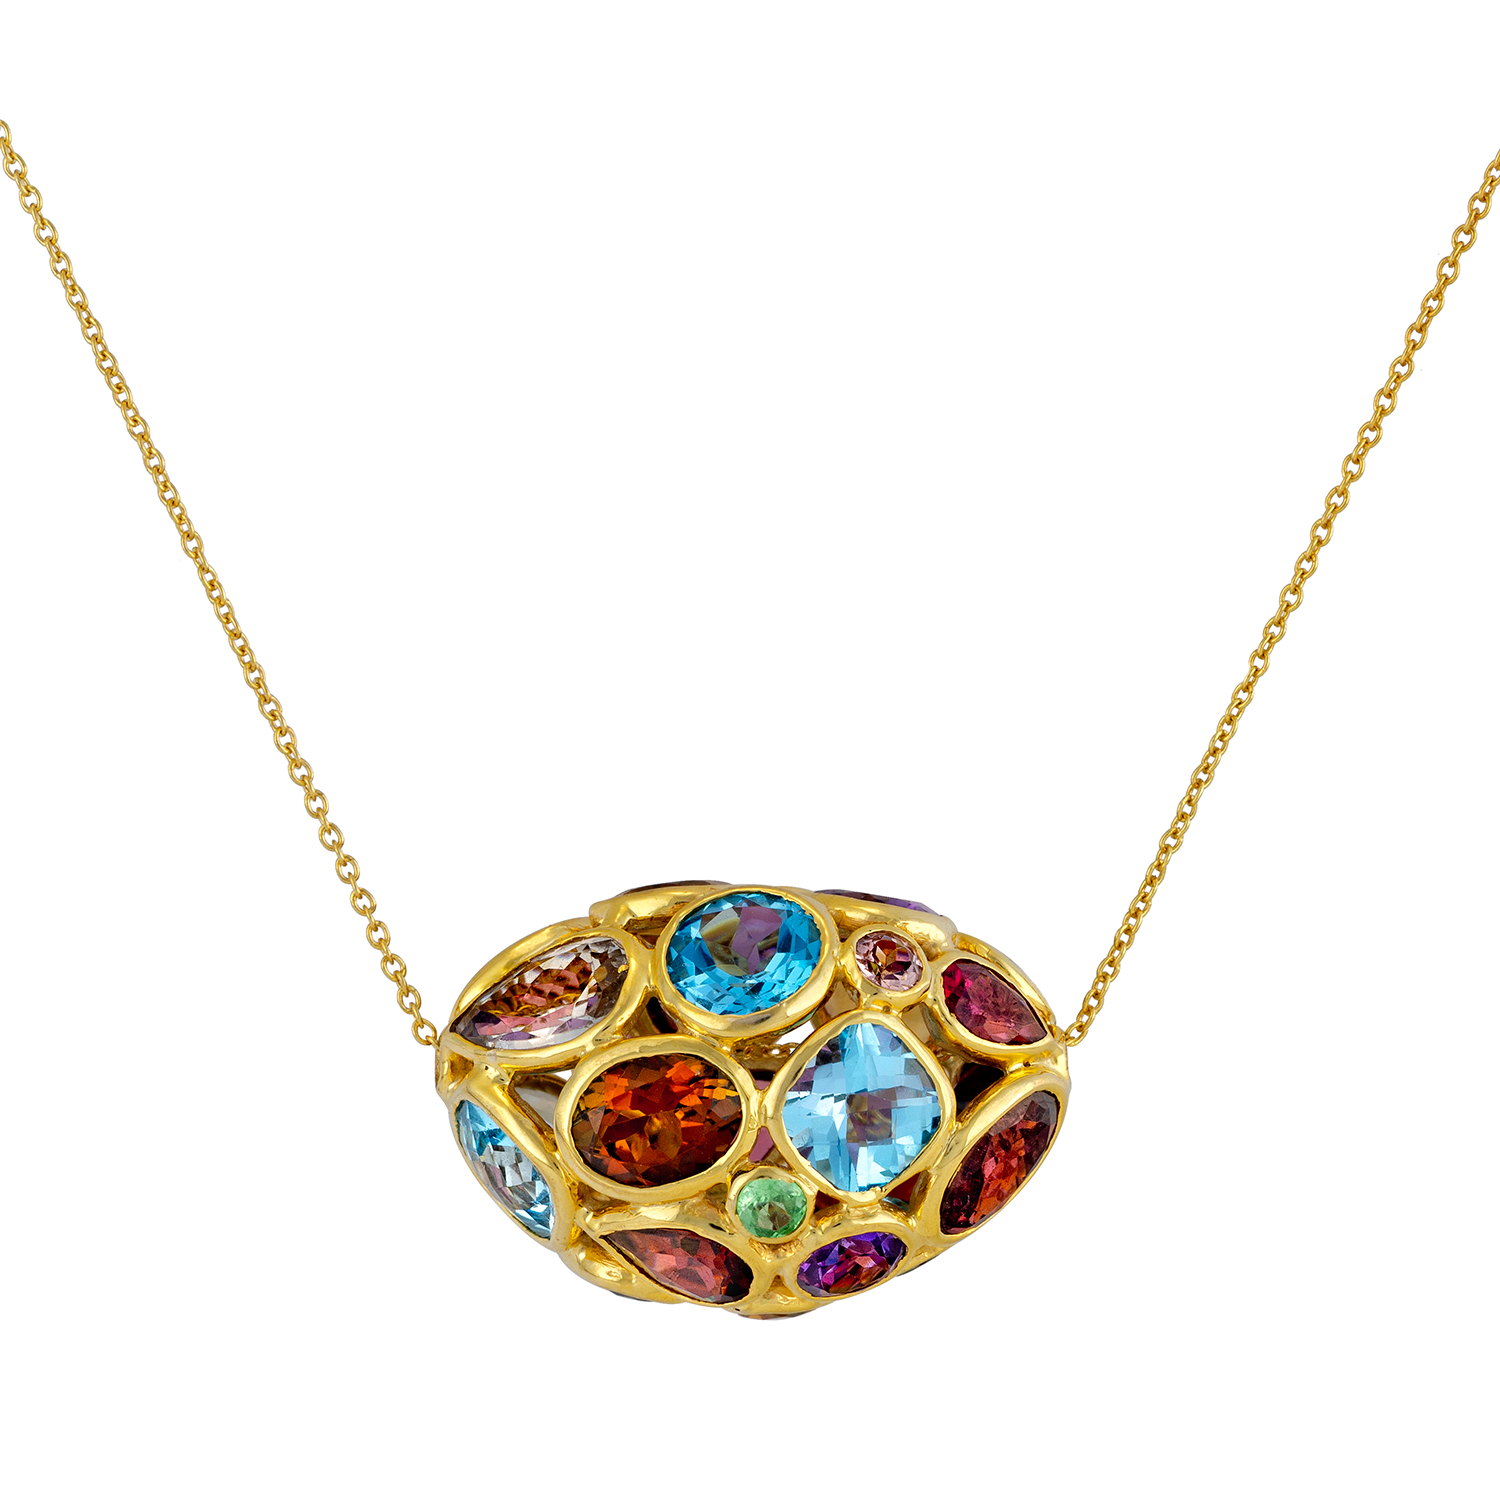 INSTORE Design Awards 2022 – Colored Stone Jewelry Under $5,000